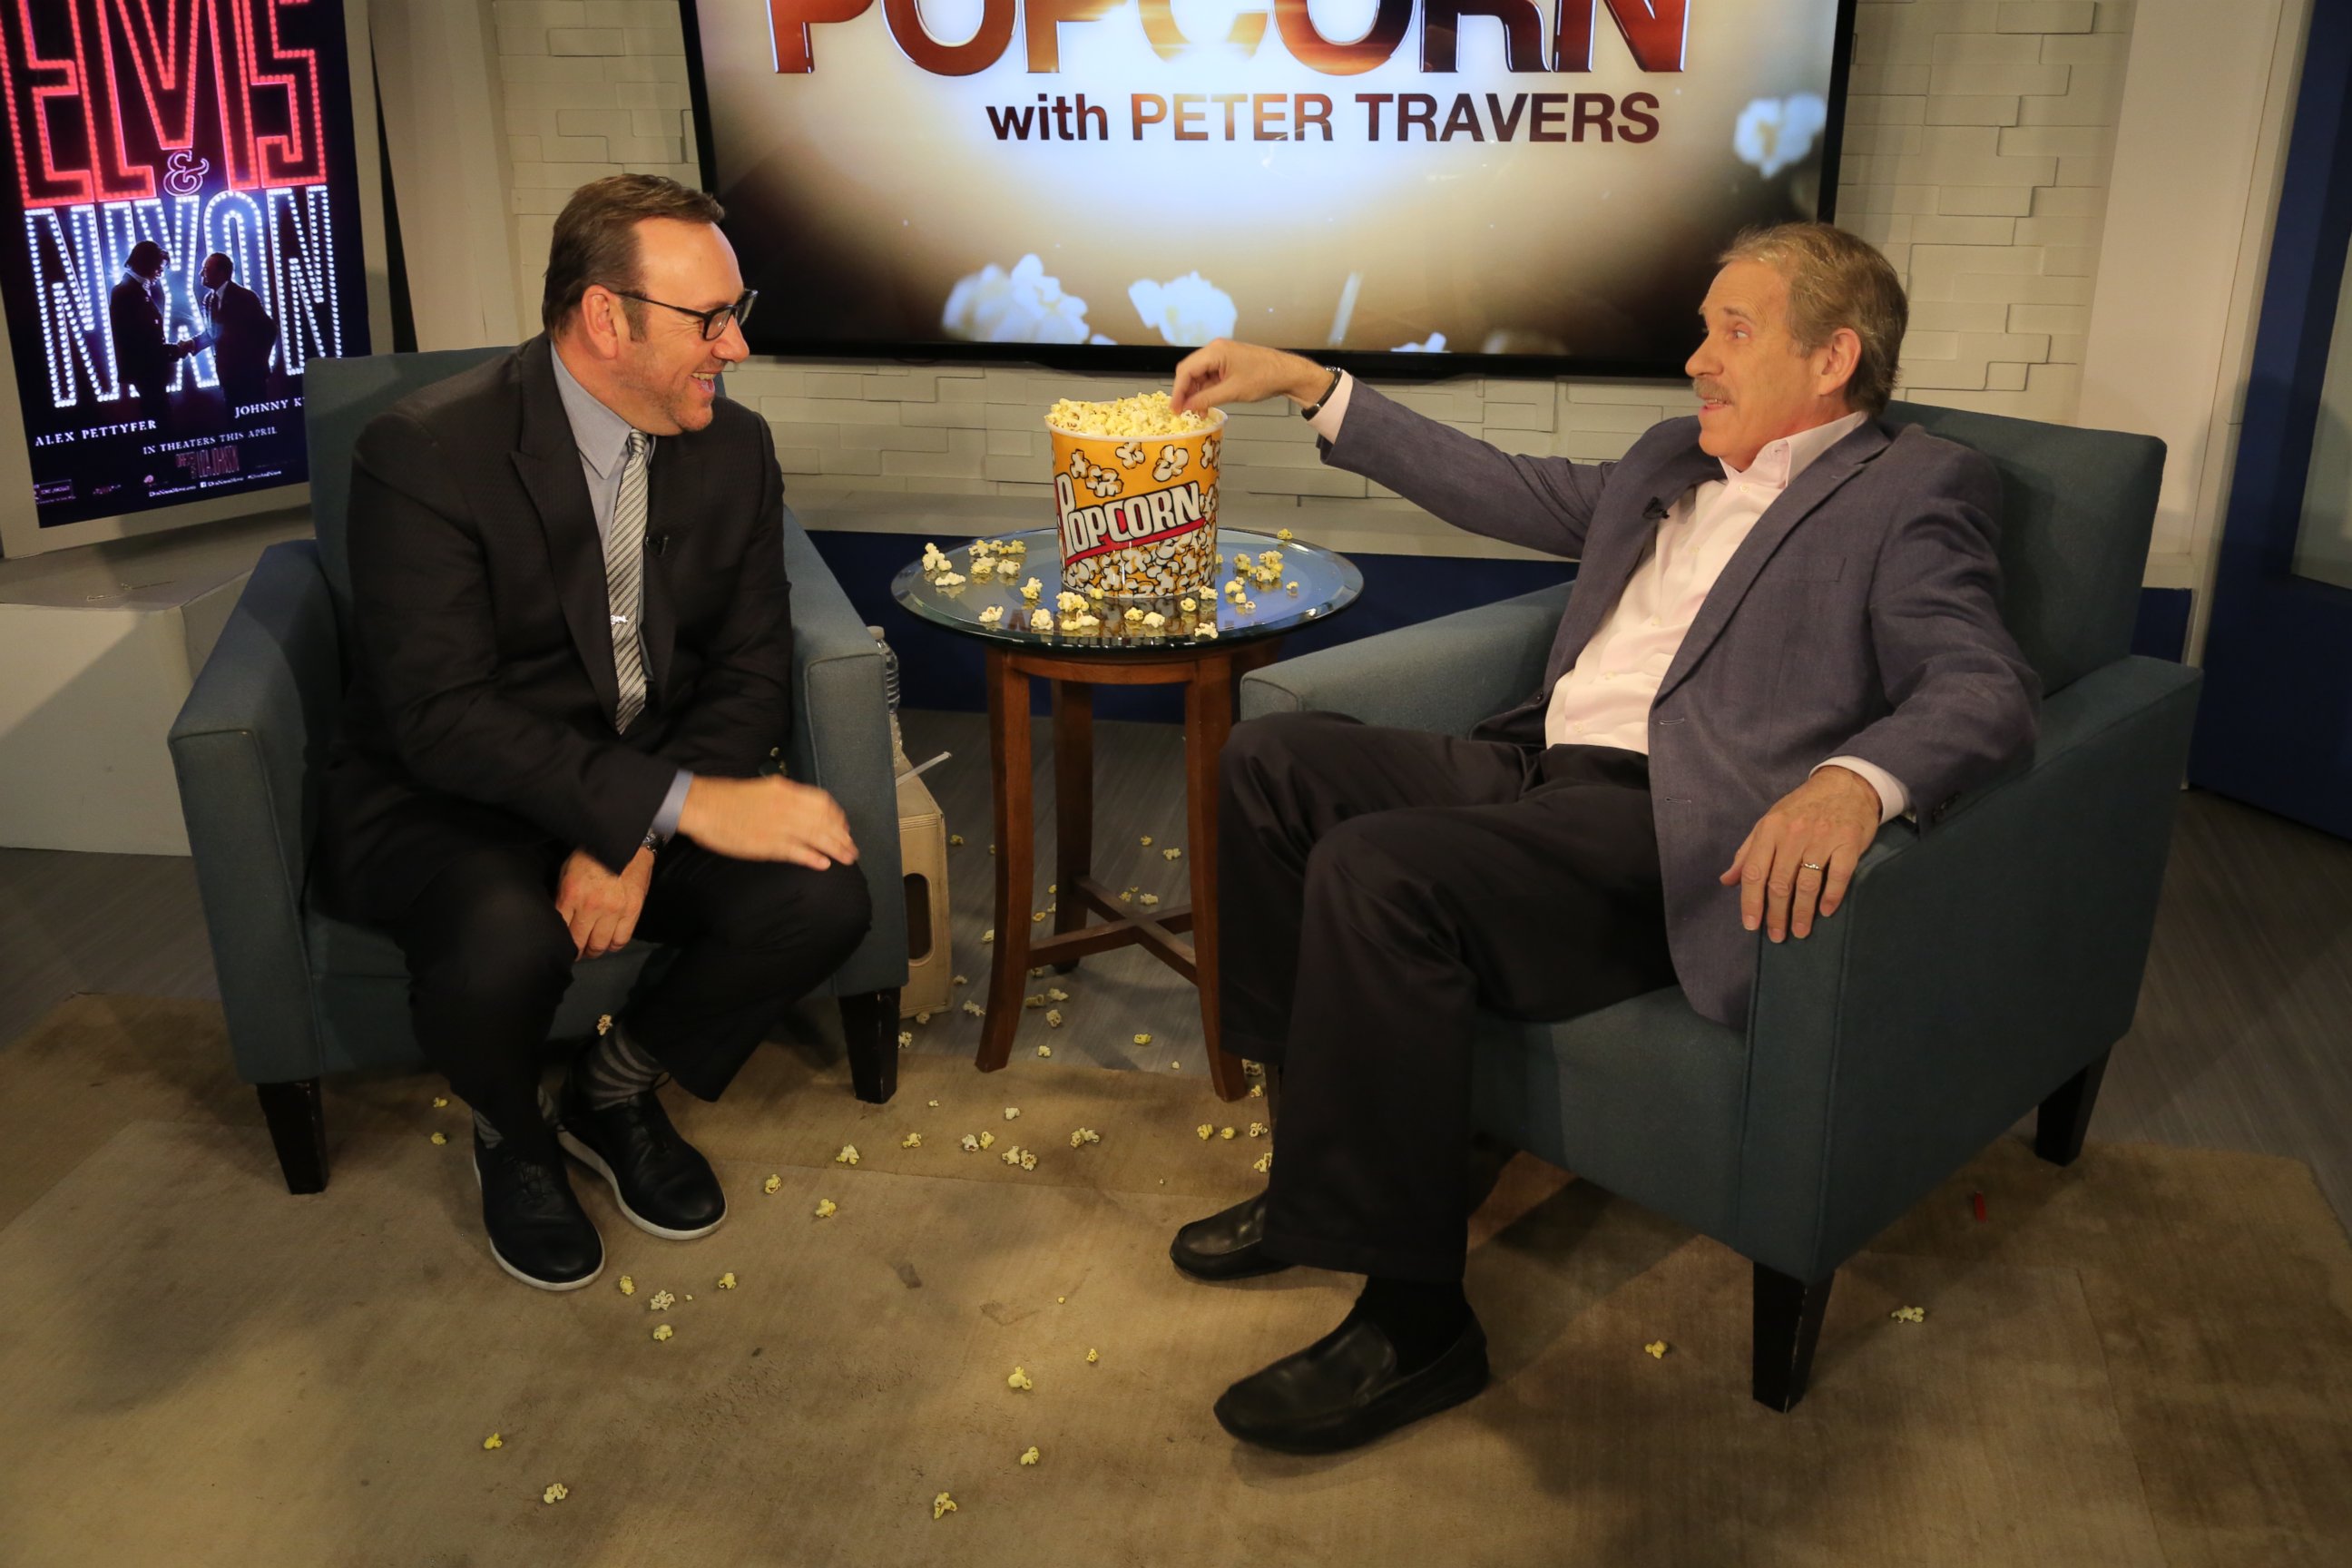 PHOTO: Kevin Spacey and Peter Travers at the ABC Headquarters in New York, April 18, 2016